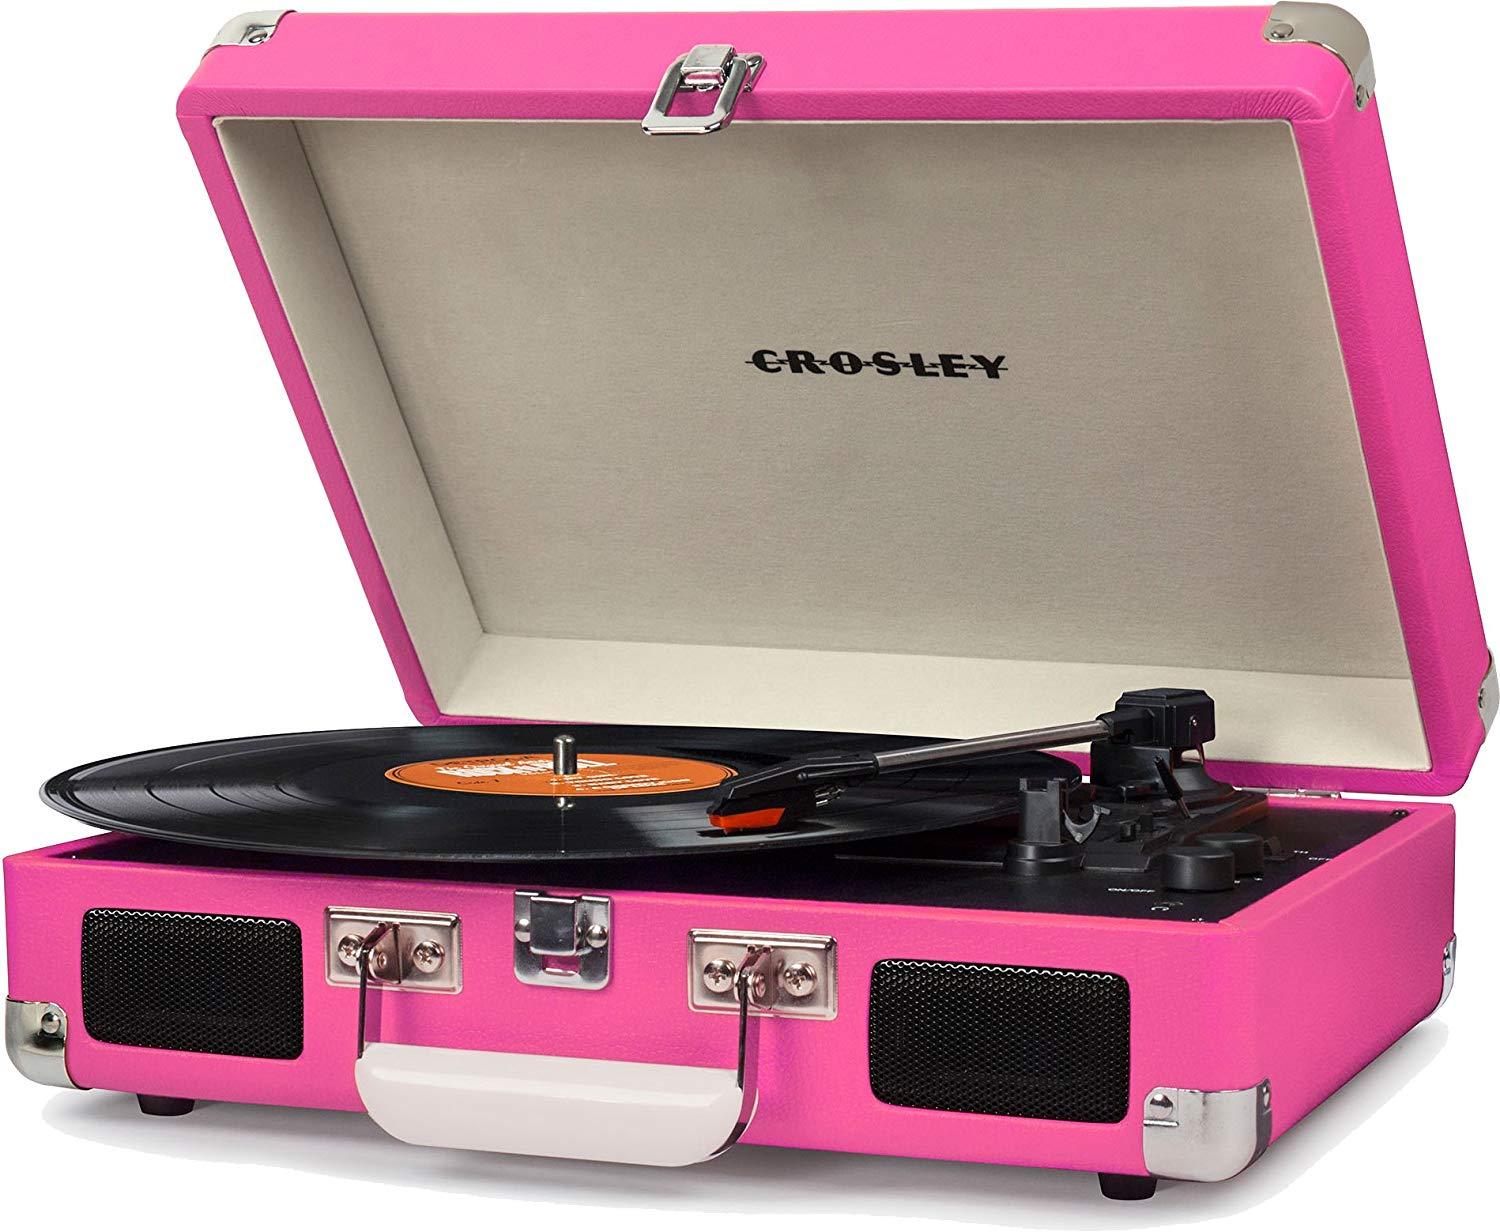 PORTABLE STEREO RECORD PLAYER HOT PINK TURNTABLE ELVIS PRESLEY 3 SPEED ...